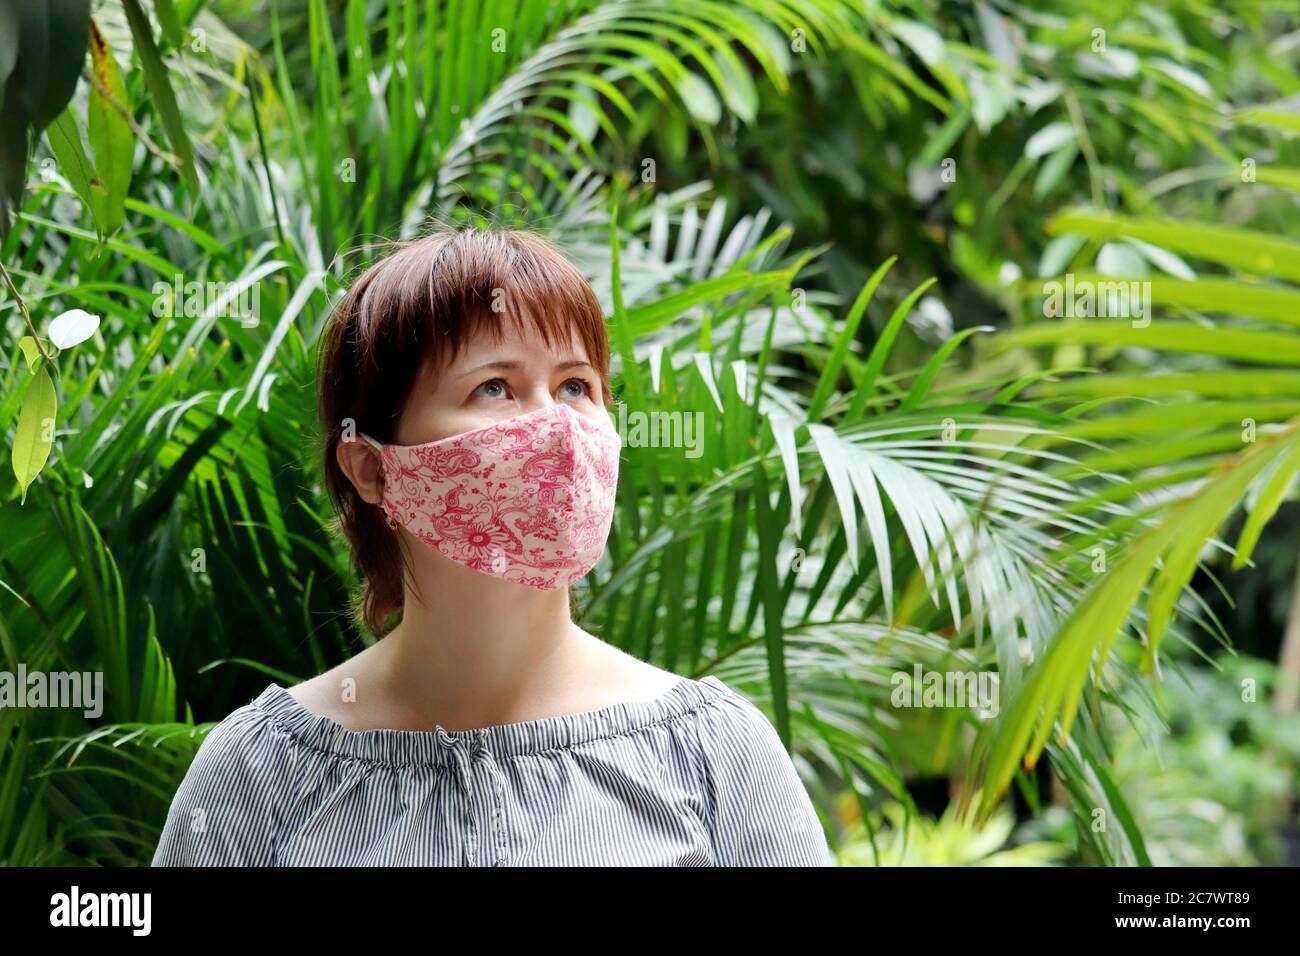 Woman in medical protective mask in a jungle. Concept of the quarantine during covid-19 coronavirus pandemic in a tropical climate Stock Photo